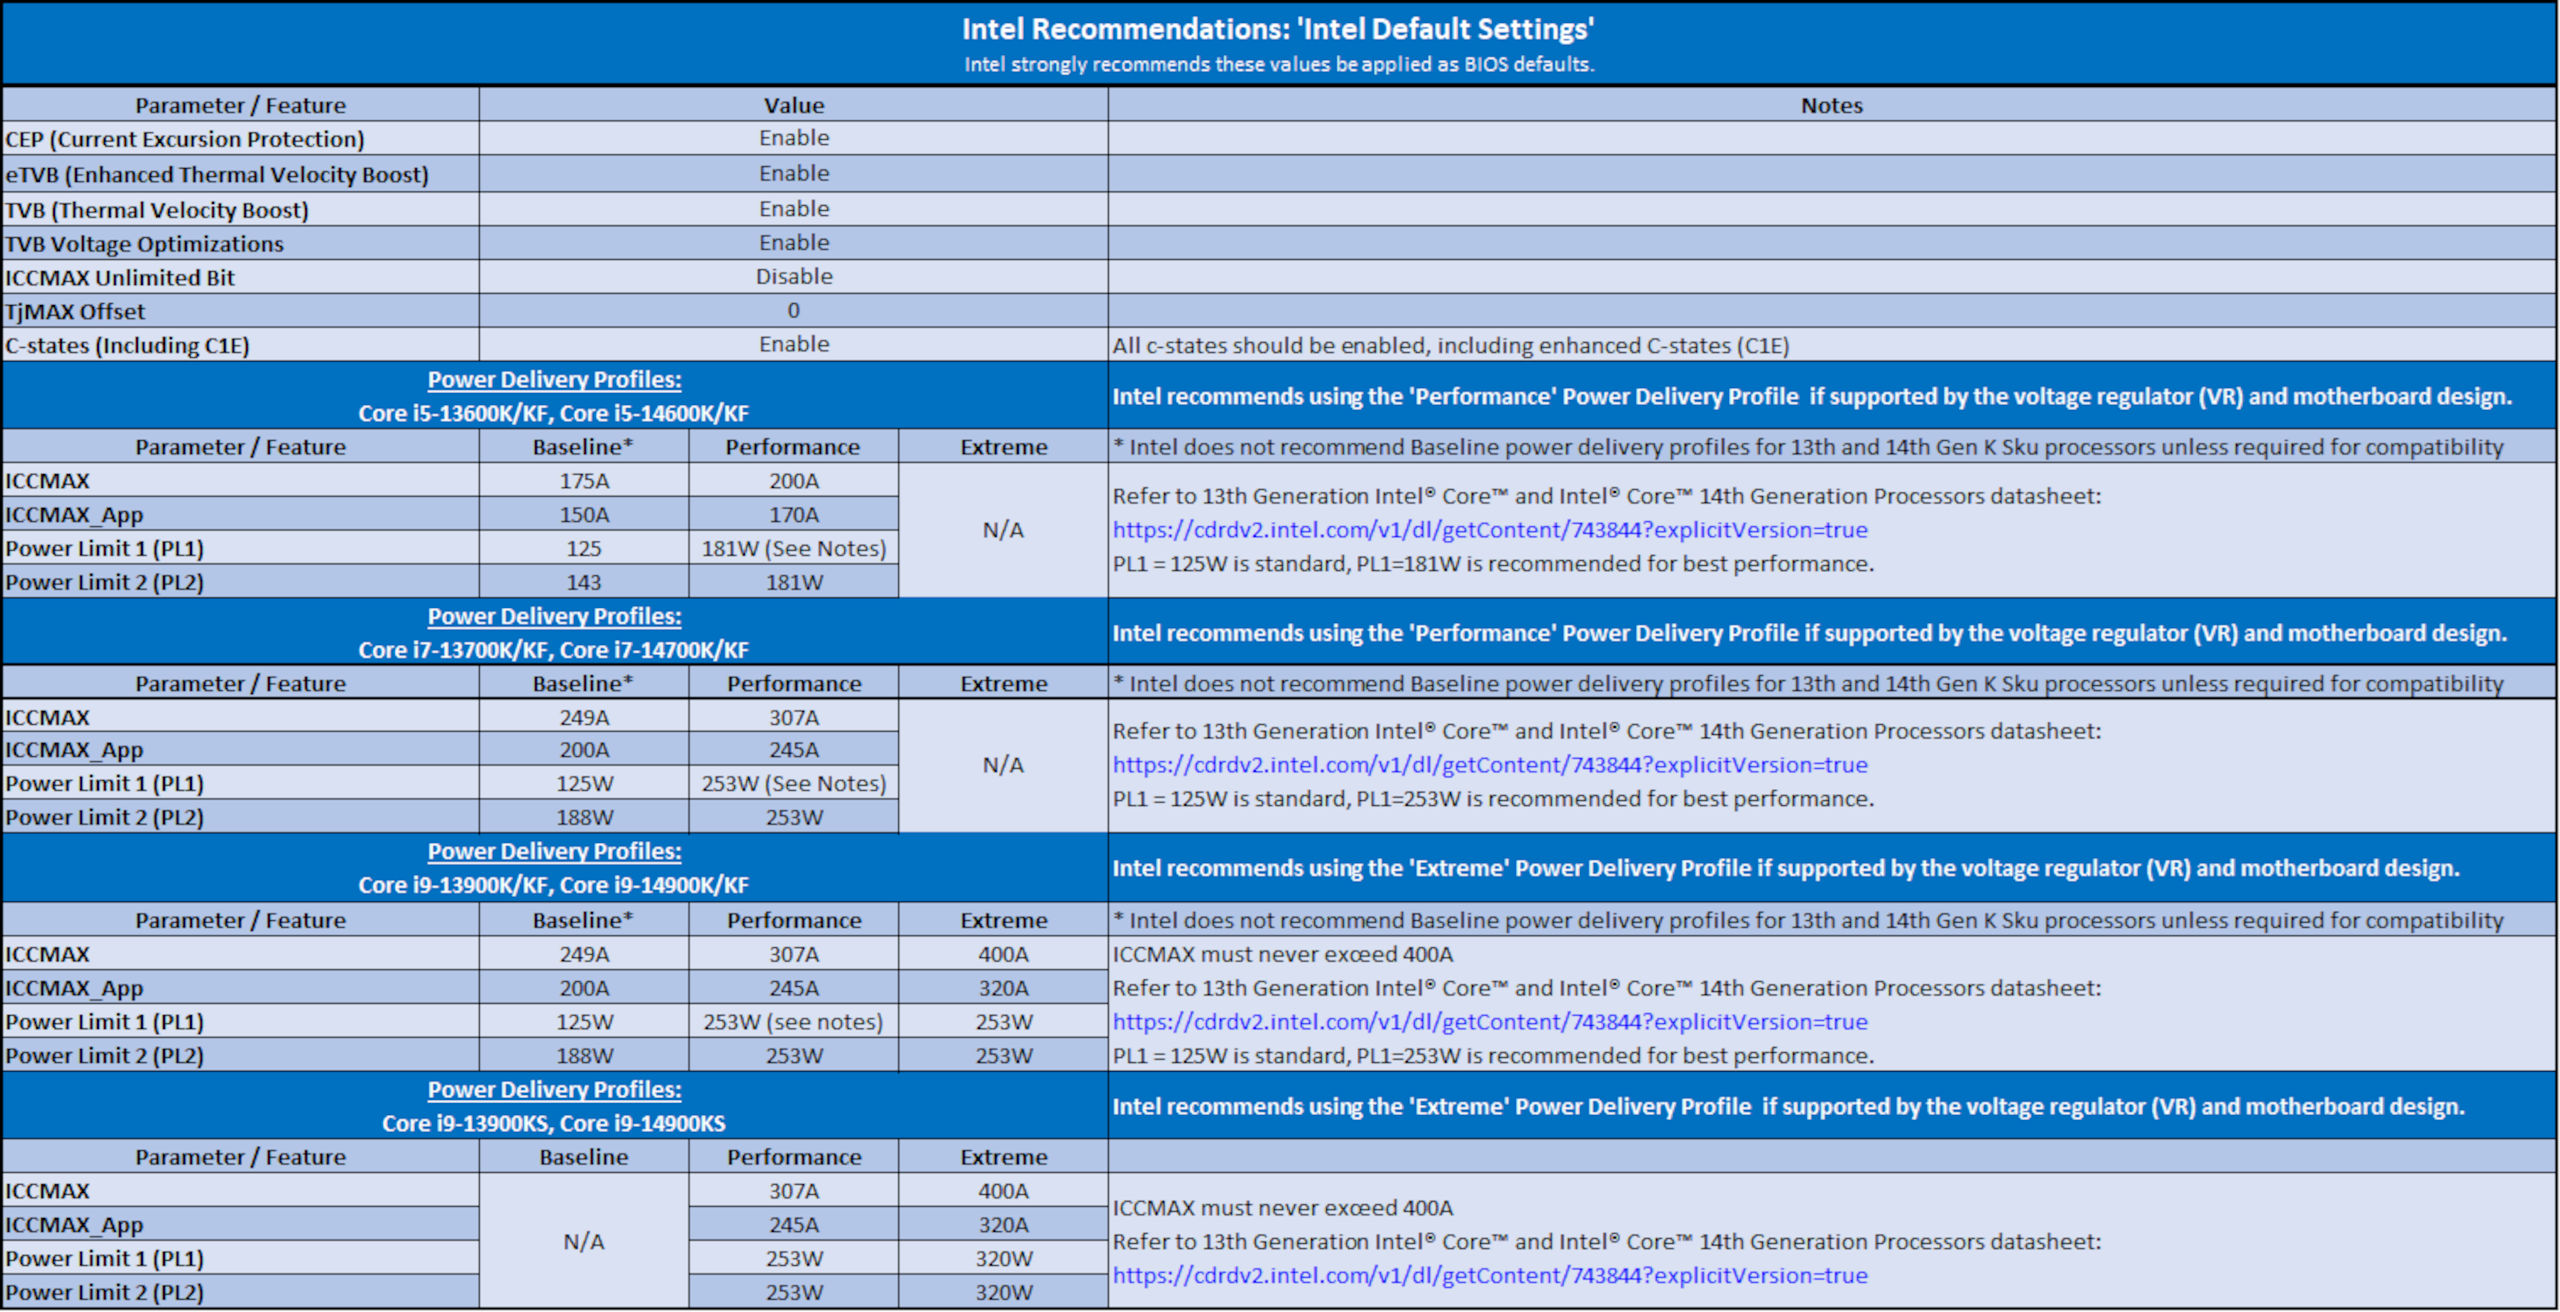 A table of BIOS settings for Intel 13th and 14th Gen K-variant Core processors